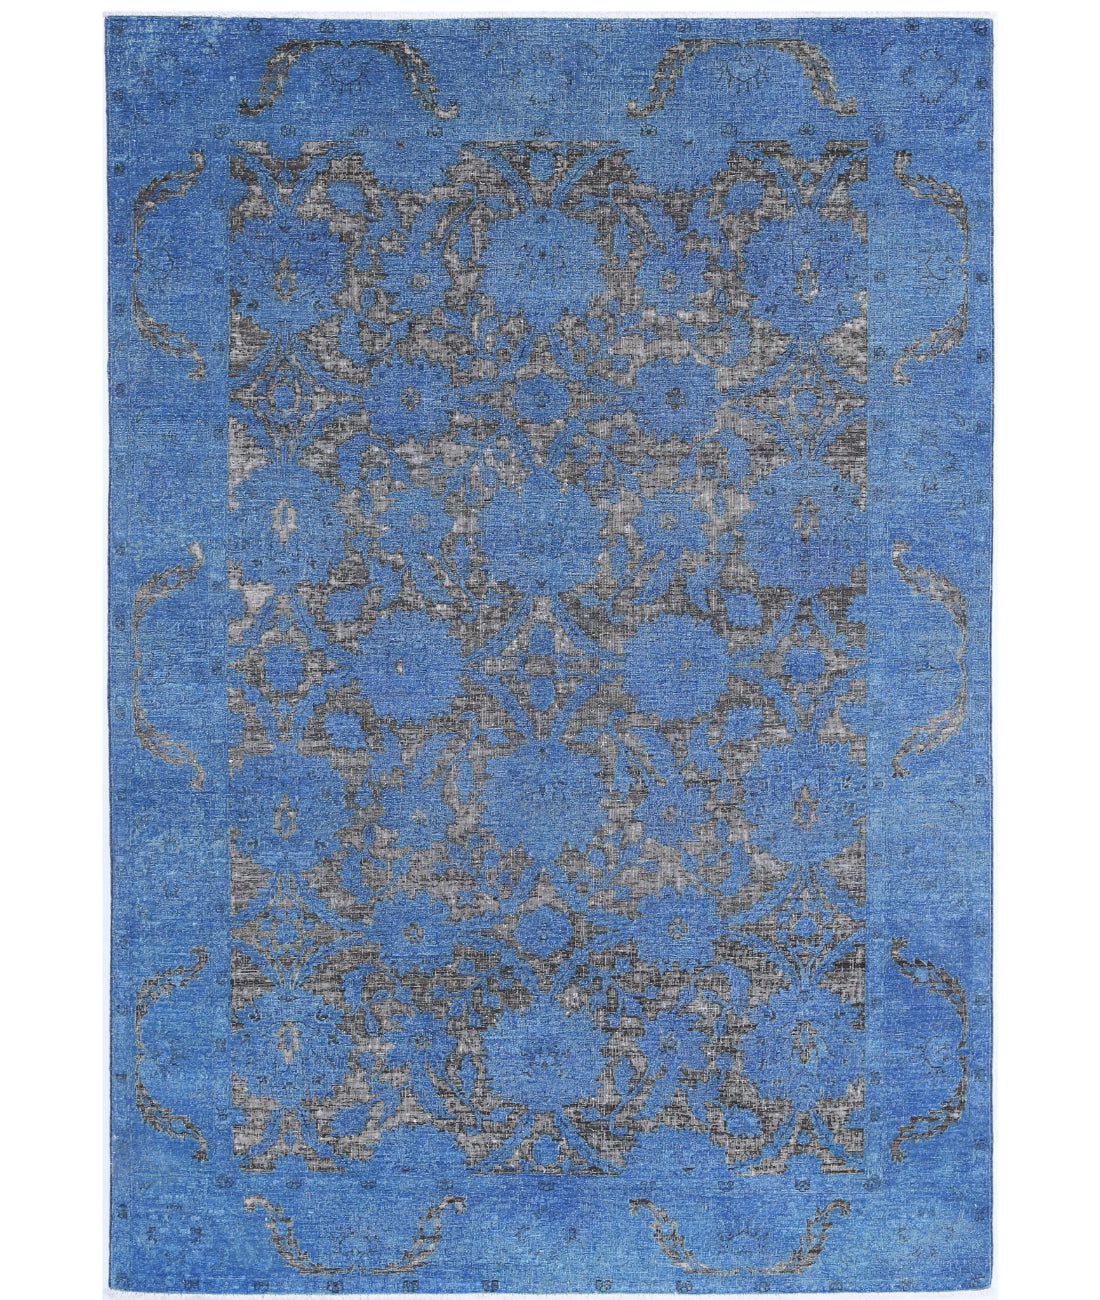 Hand Knotted Onyx Wool Rug - 5'10'' x 8'8'' 5'10'' x 8'8'' (175 X 260) / Blue / Blue